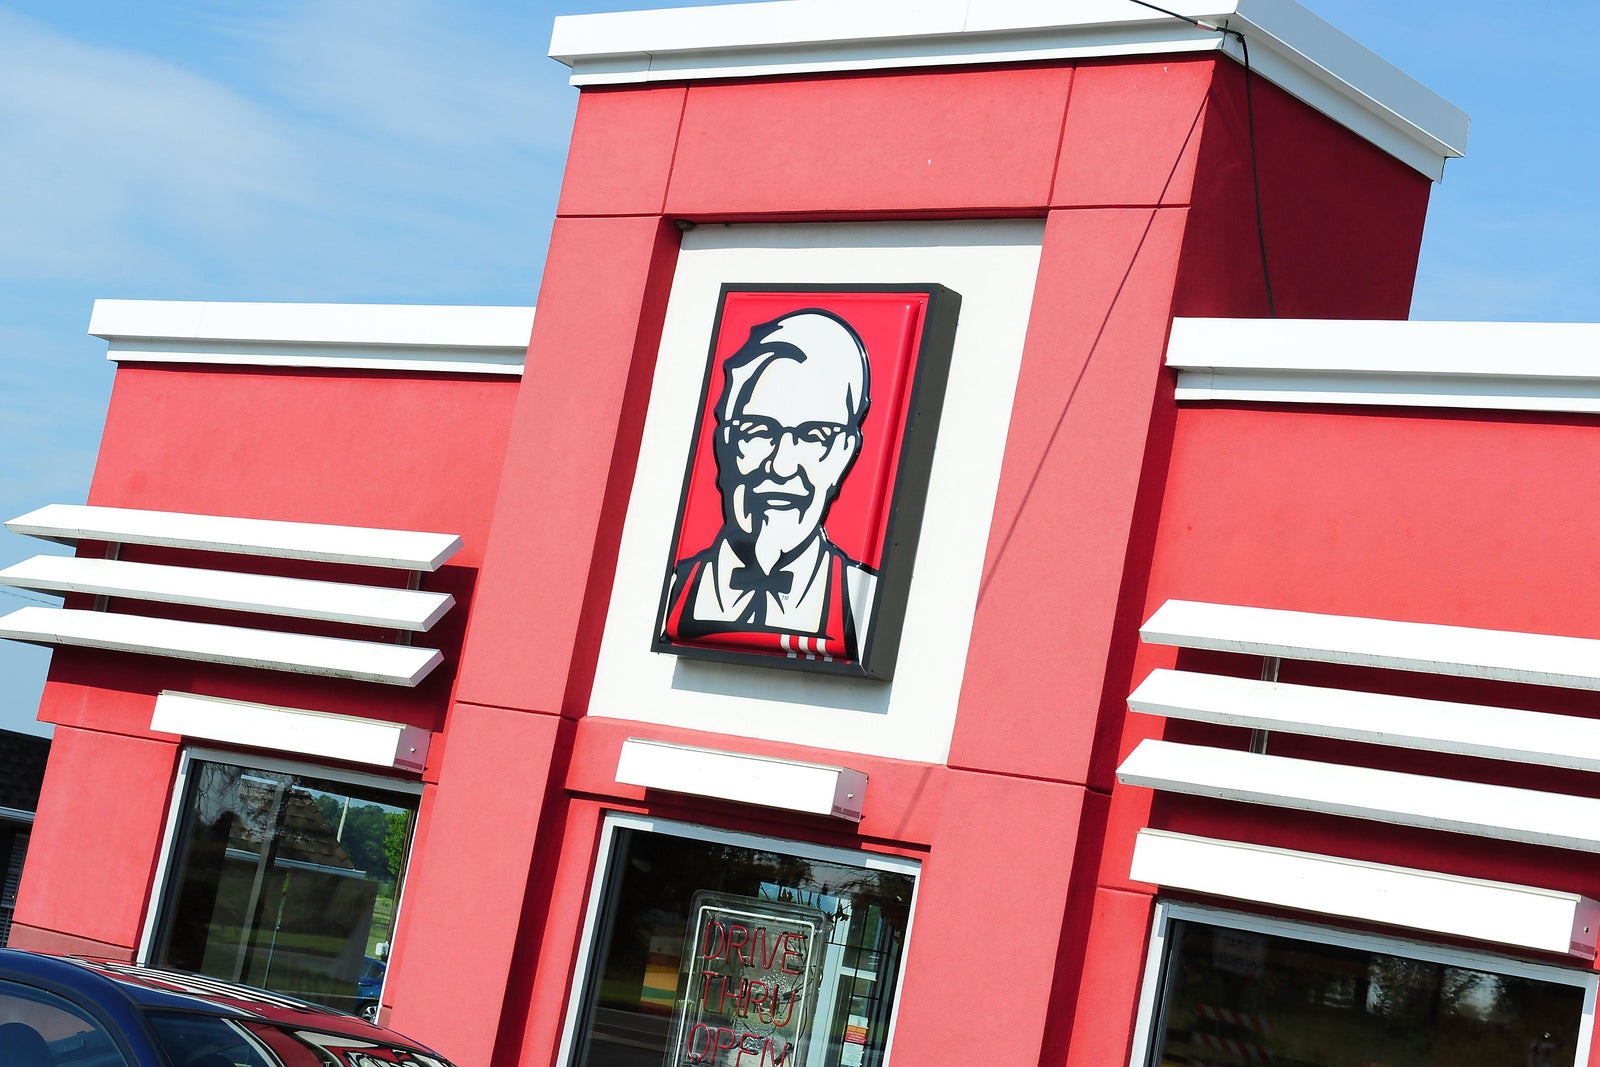 Muslim KFC franchise owner barred from advertising chicken as halal.